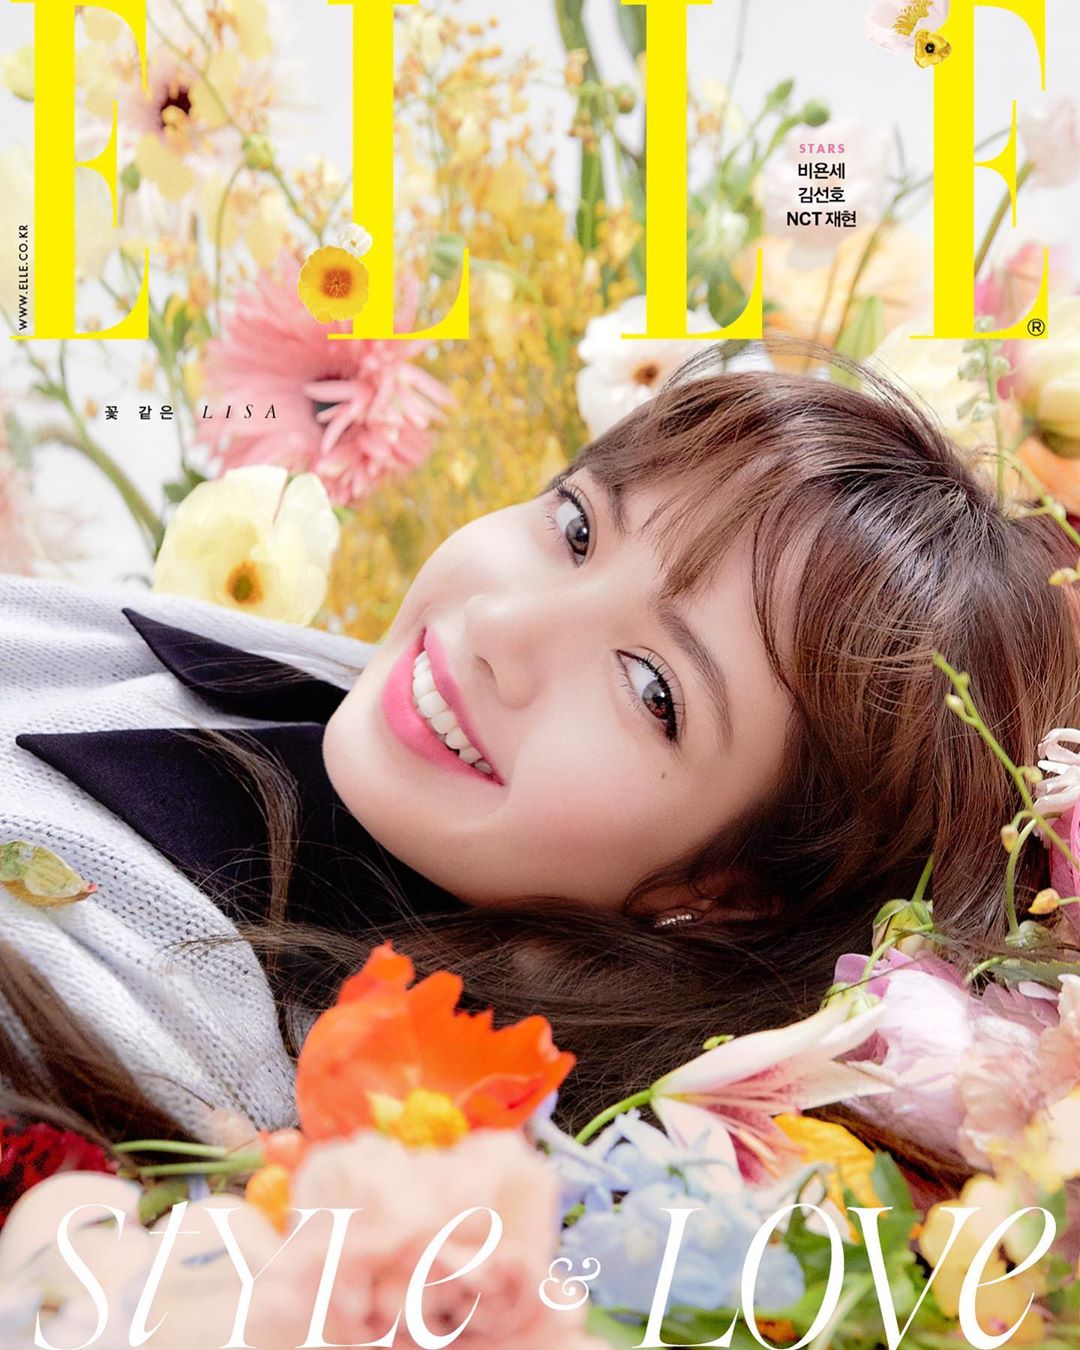 BLACKPINK'S LISA is the Cover Star of ELLE KOREA May 2022 Issue